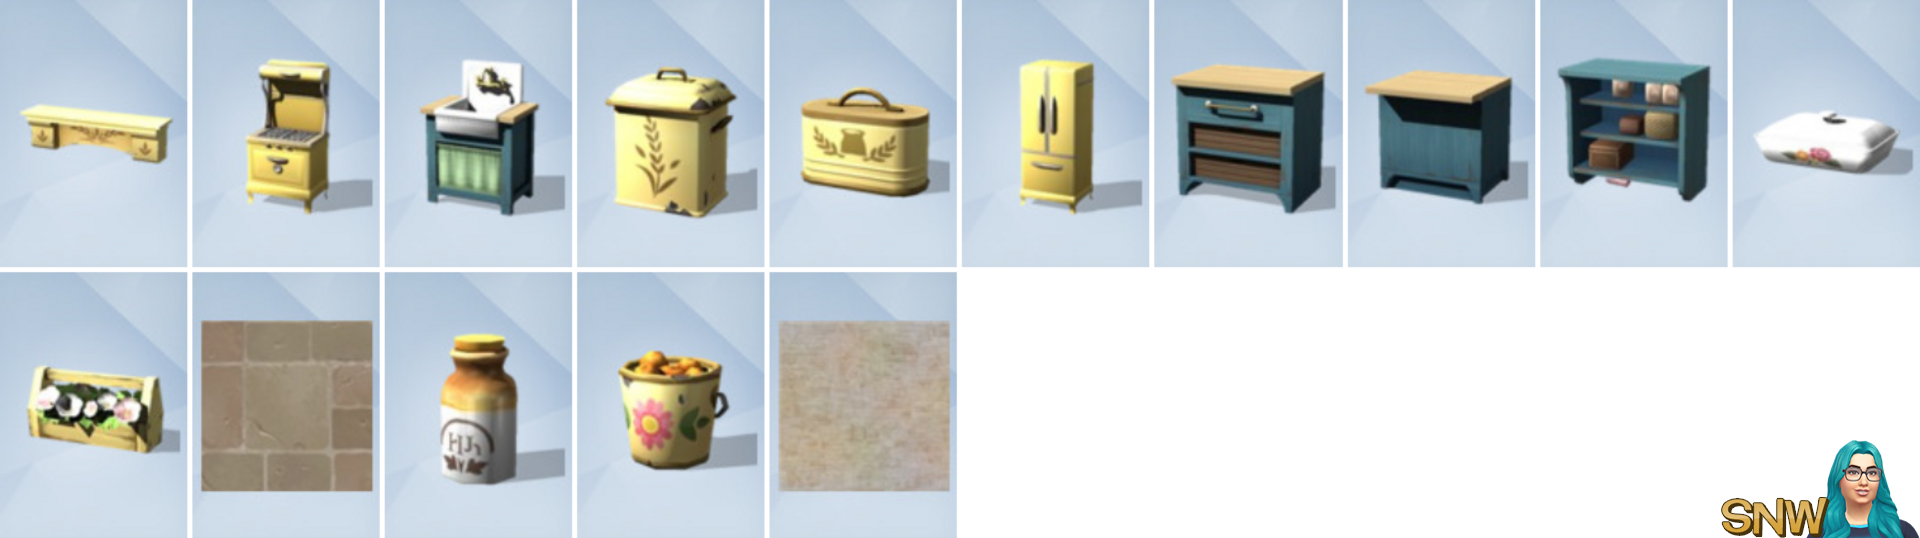 The Sims 4: Country Kitchen Kit - Build Mode Items